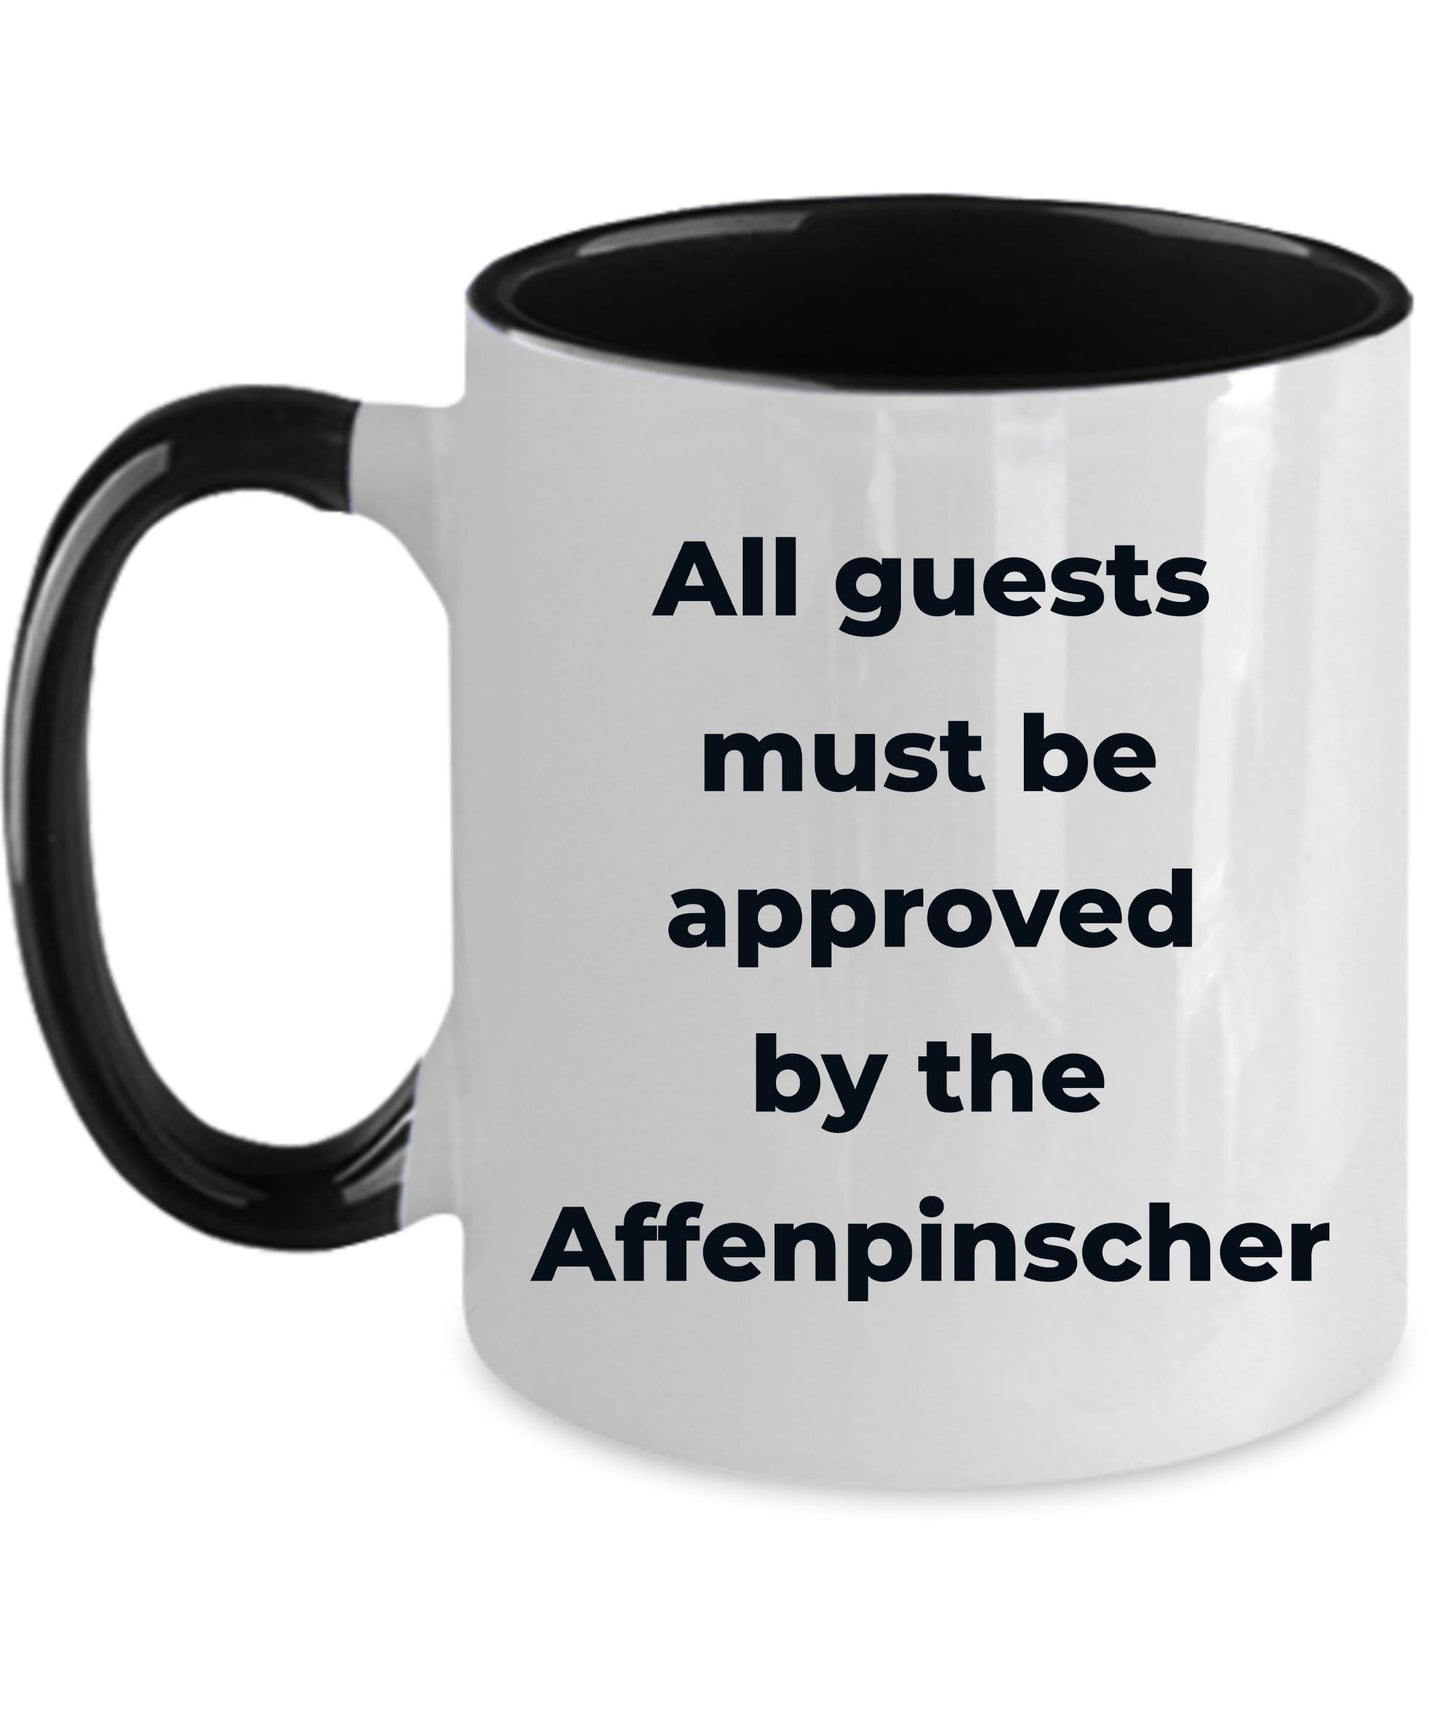 Affenpinscher dog funny coffee mug - Guests must be approved by the Affenpinscher